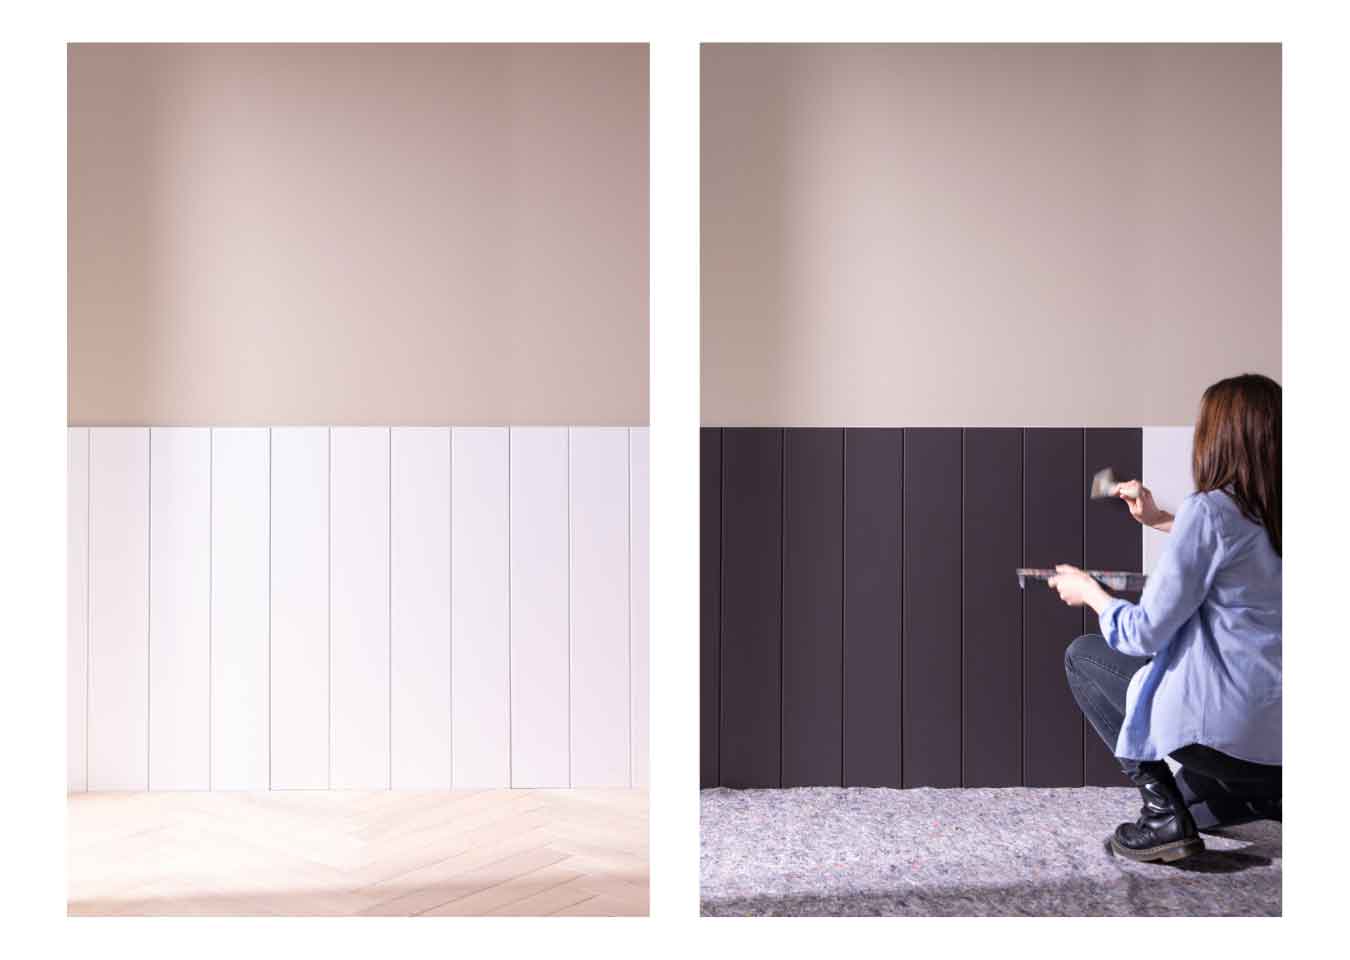 Left: white primed tongue and groove wall panels. Right: a woman wearing a blue shirt and black boots painting the panels.